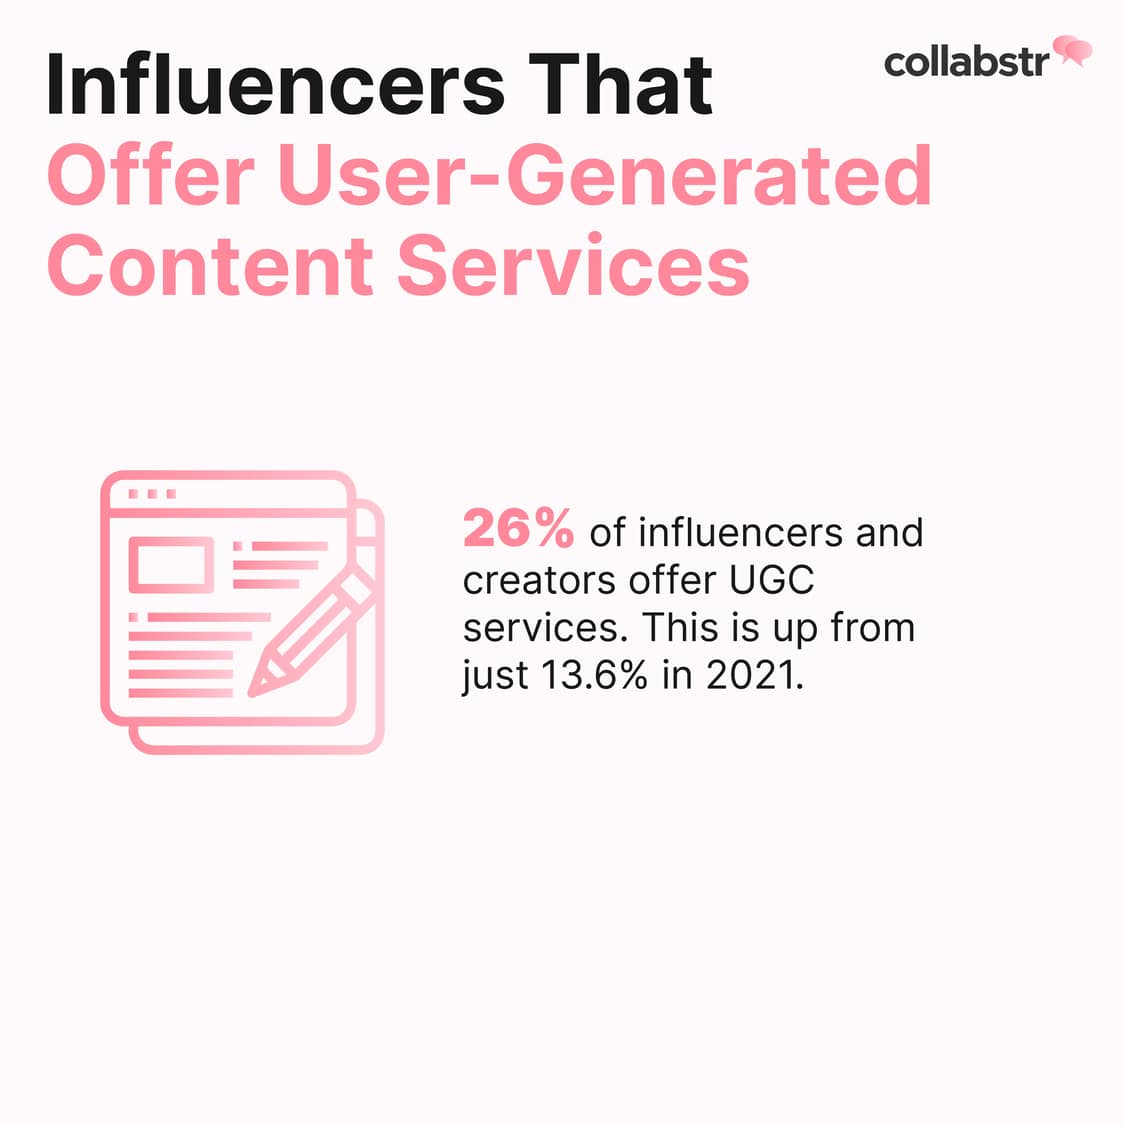 26% of influencers offer UGC services.